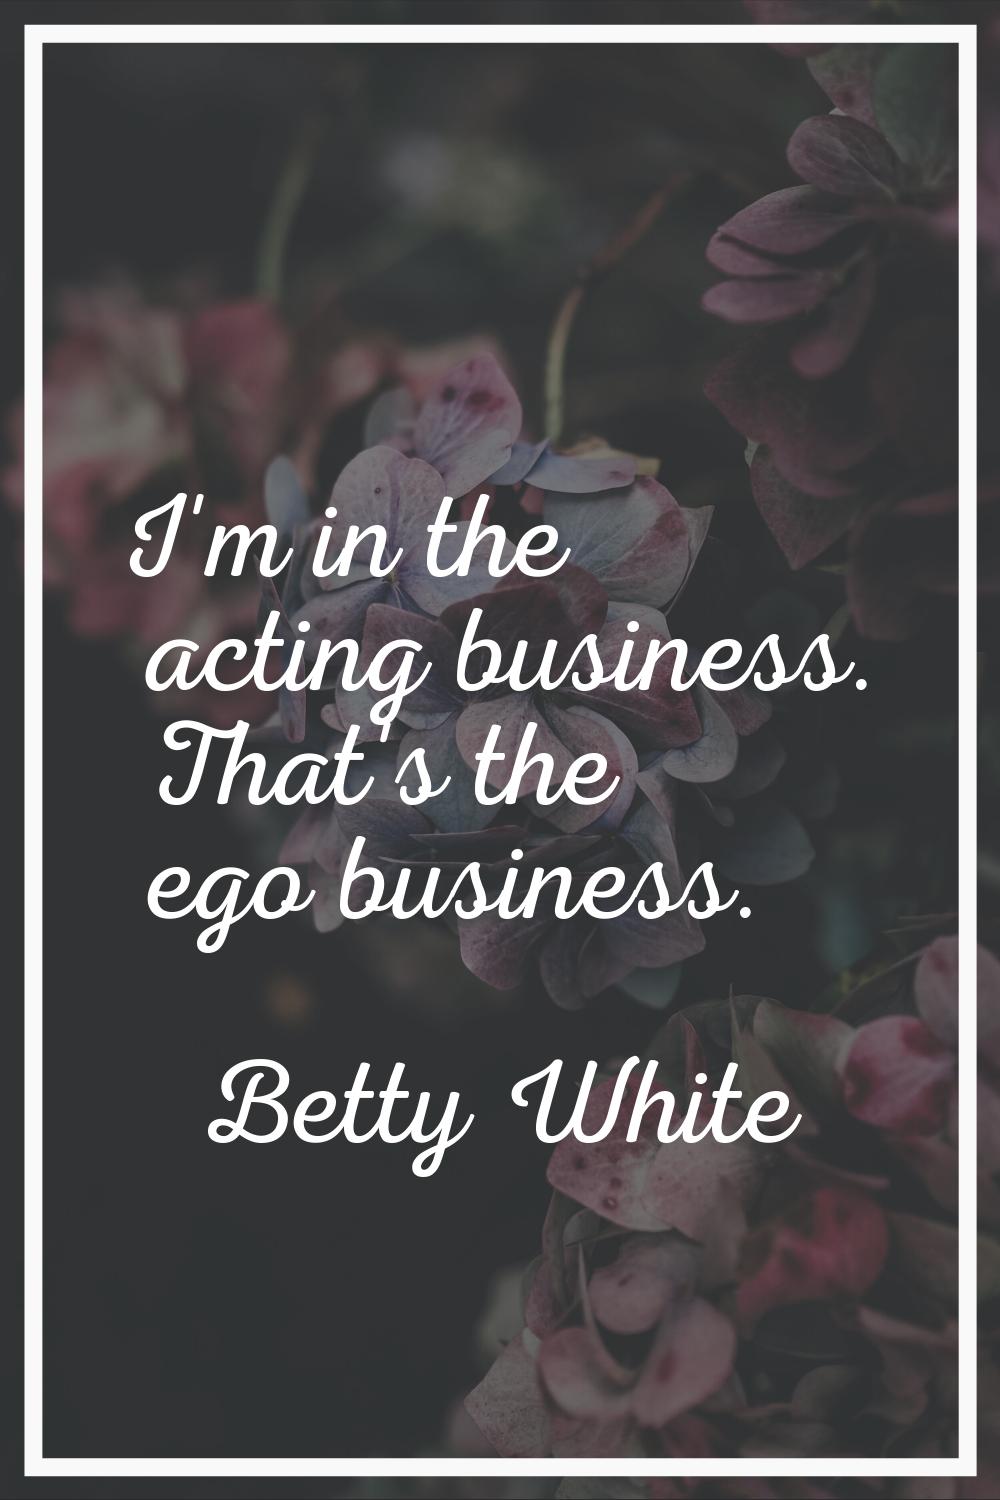 I'm in the acting business. That's the ego business.